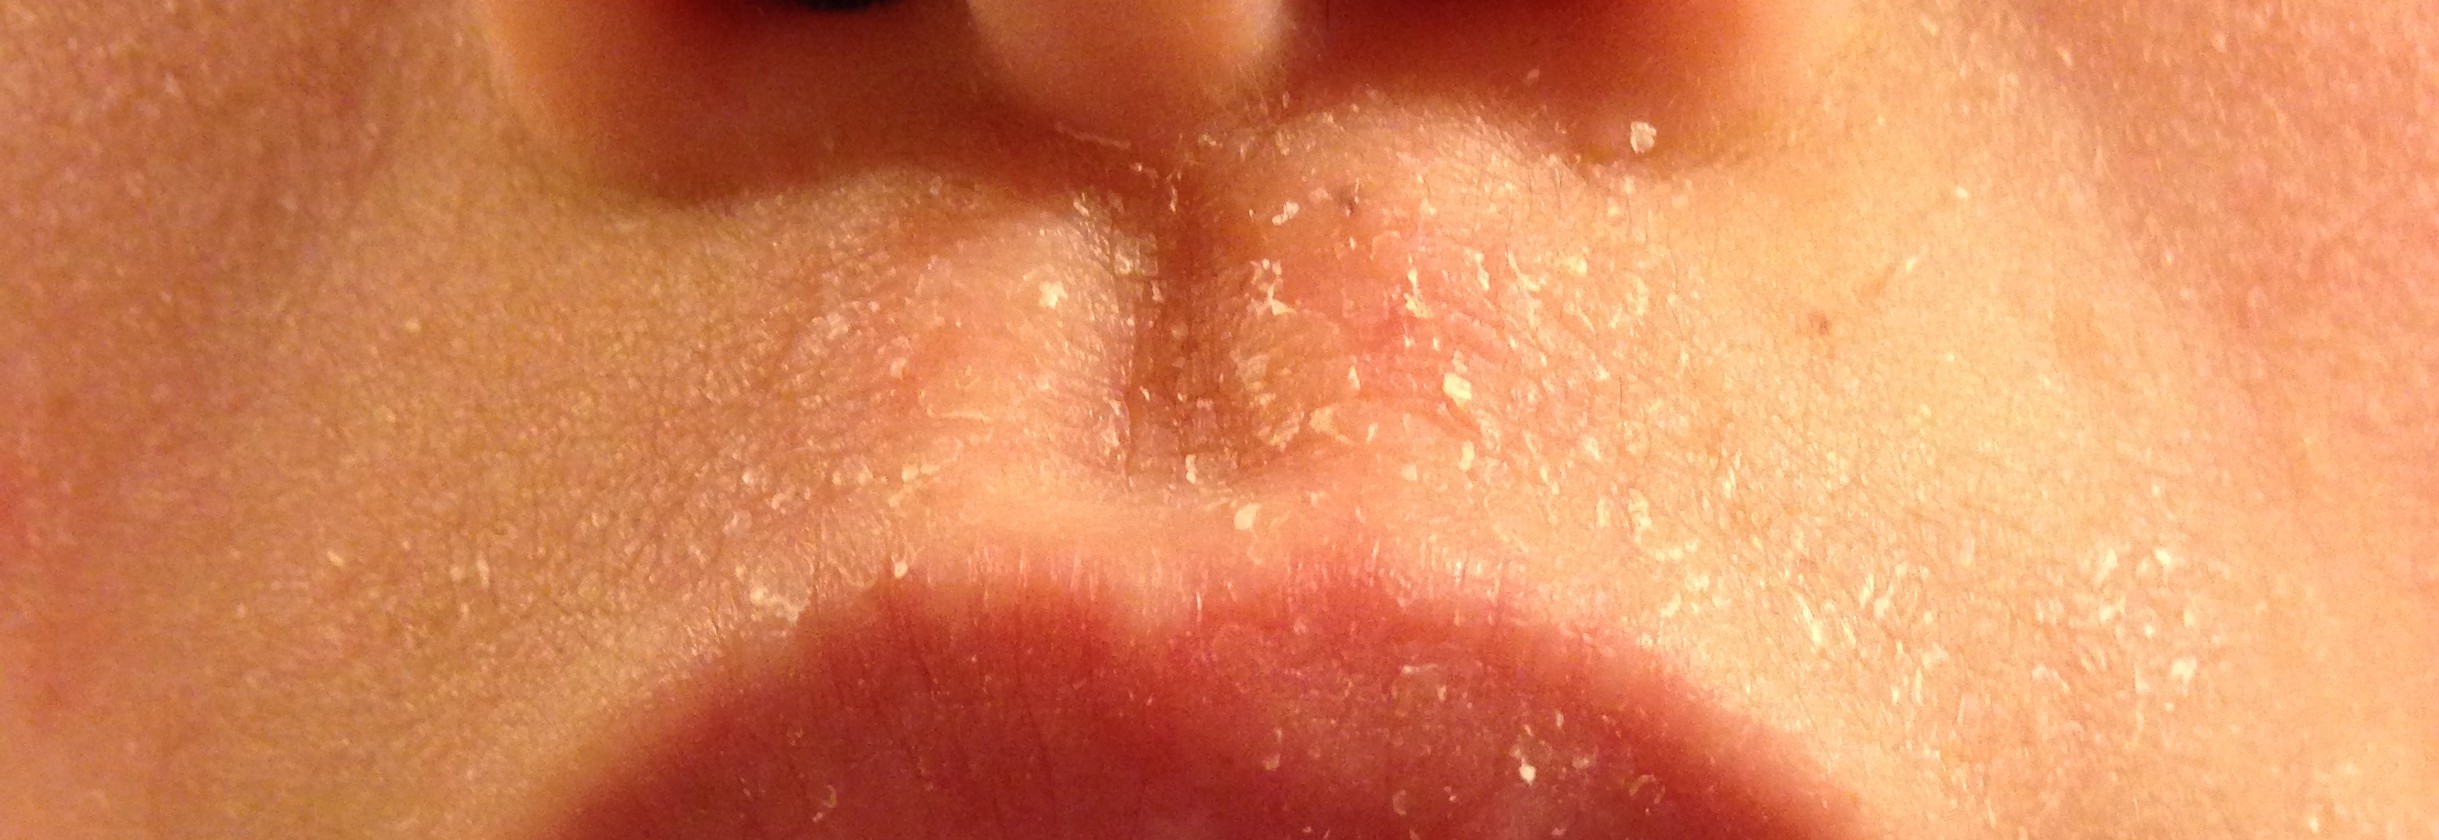 Raised Small Red Bumps around Eyes - MedHelp